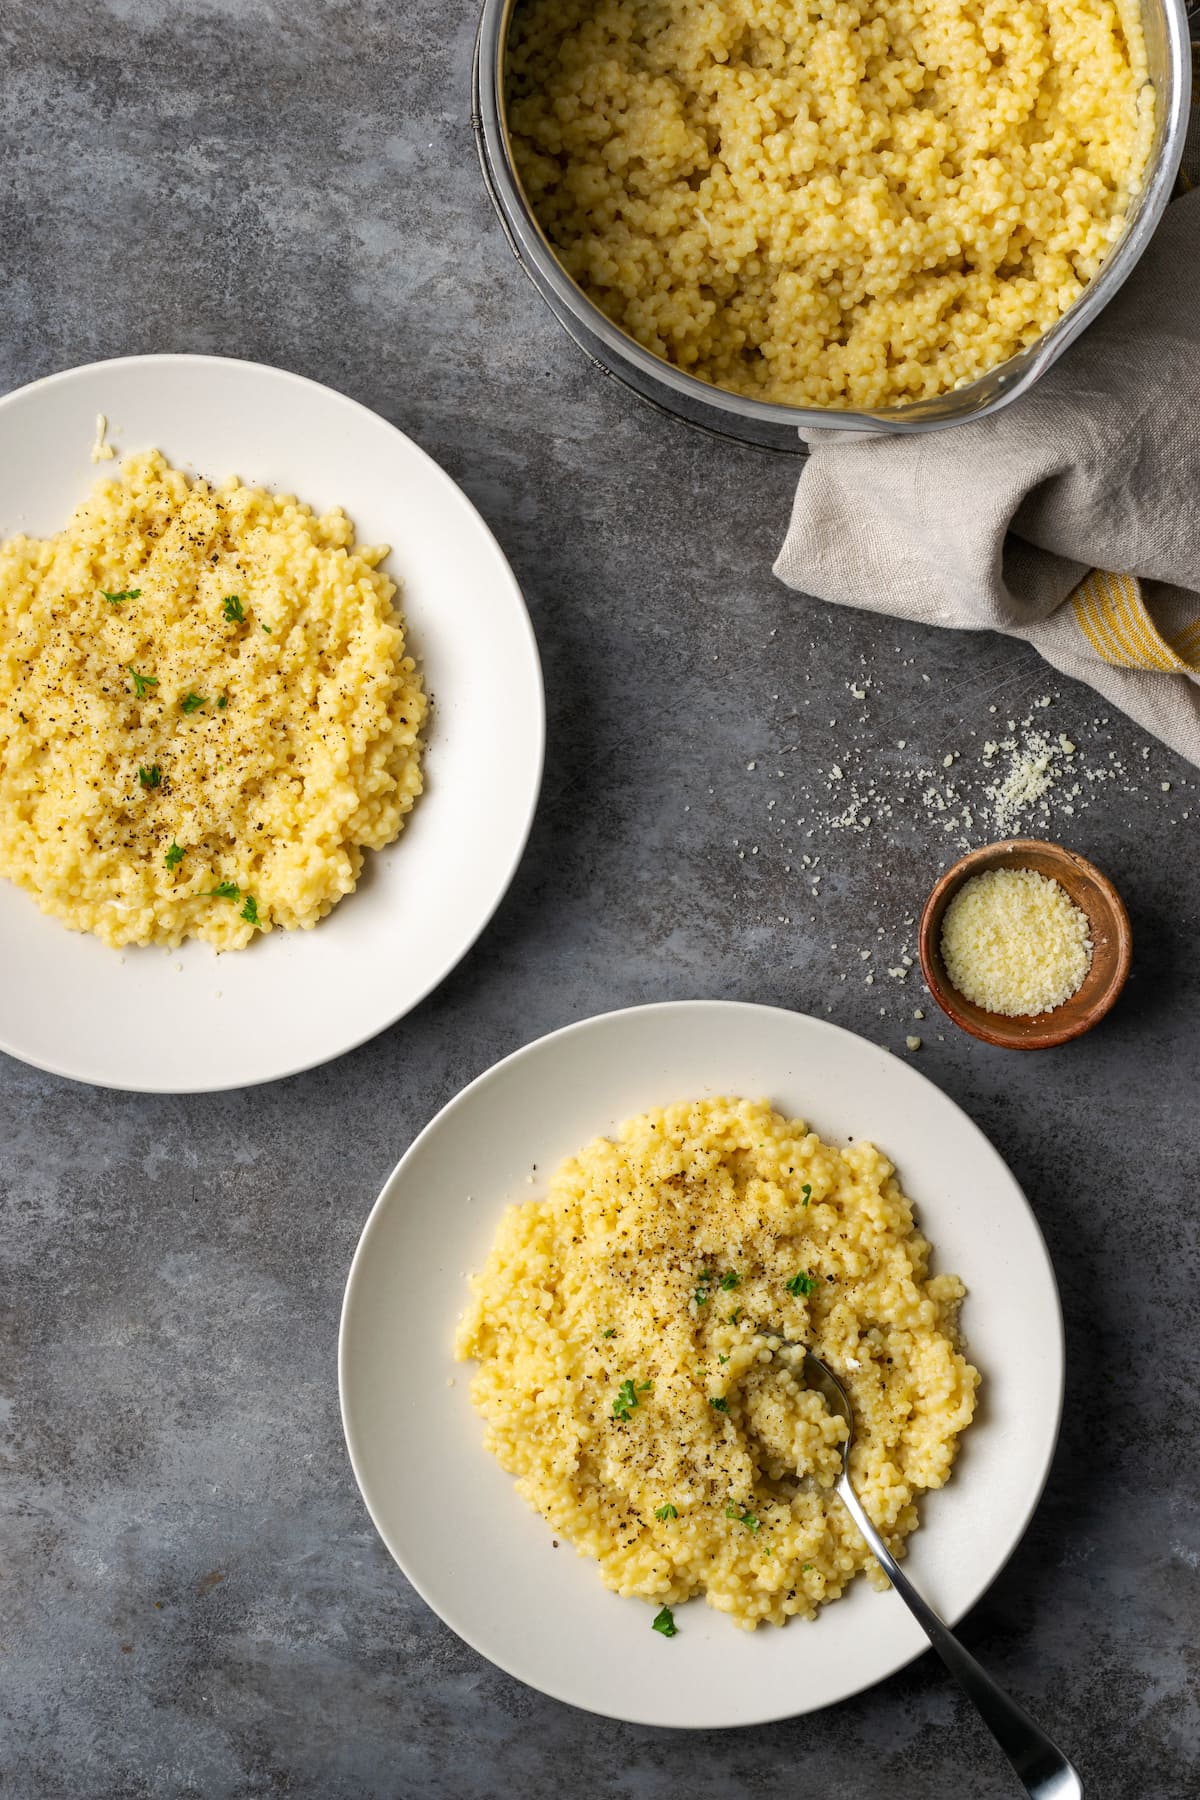 Two servings of pastina on white plates next to a pan of pastina pasta.